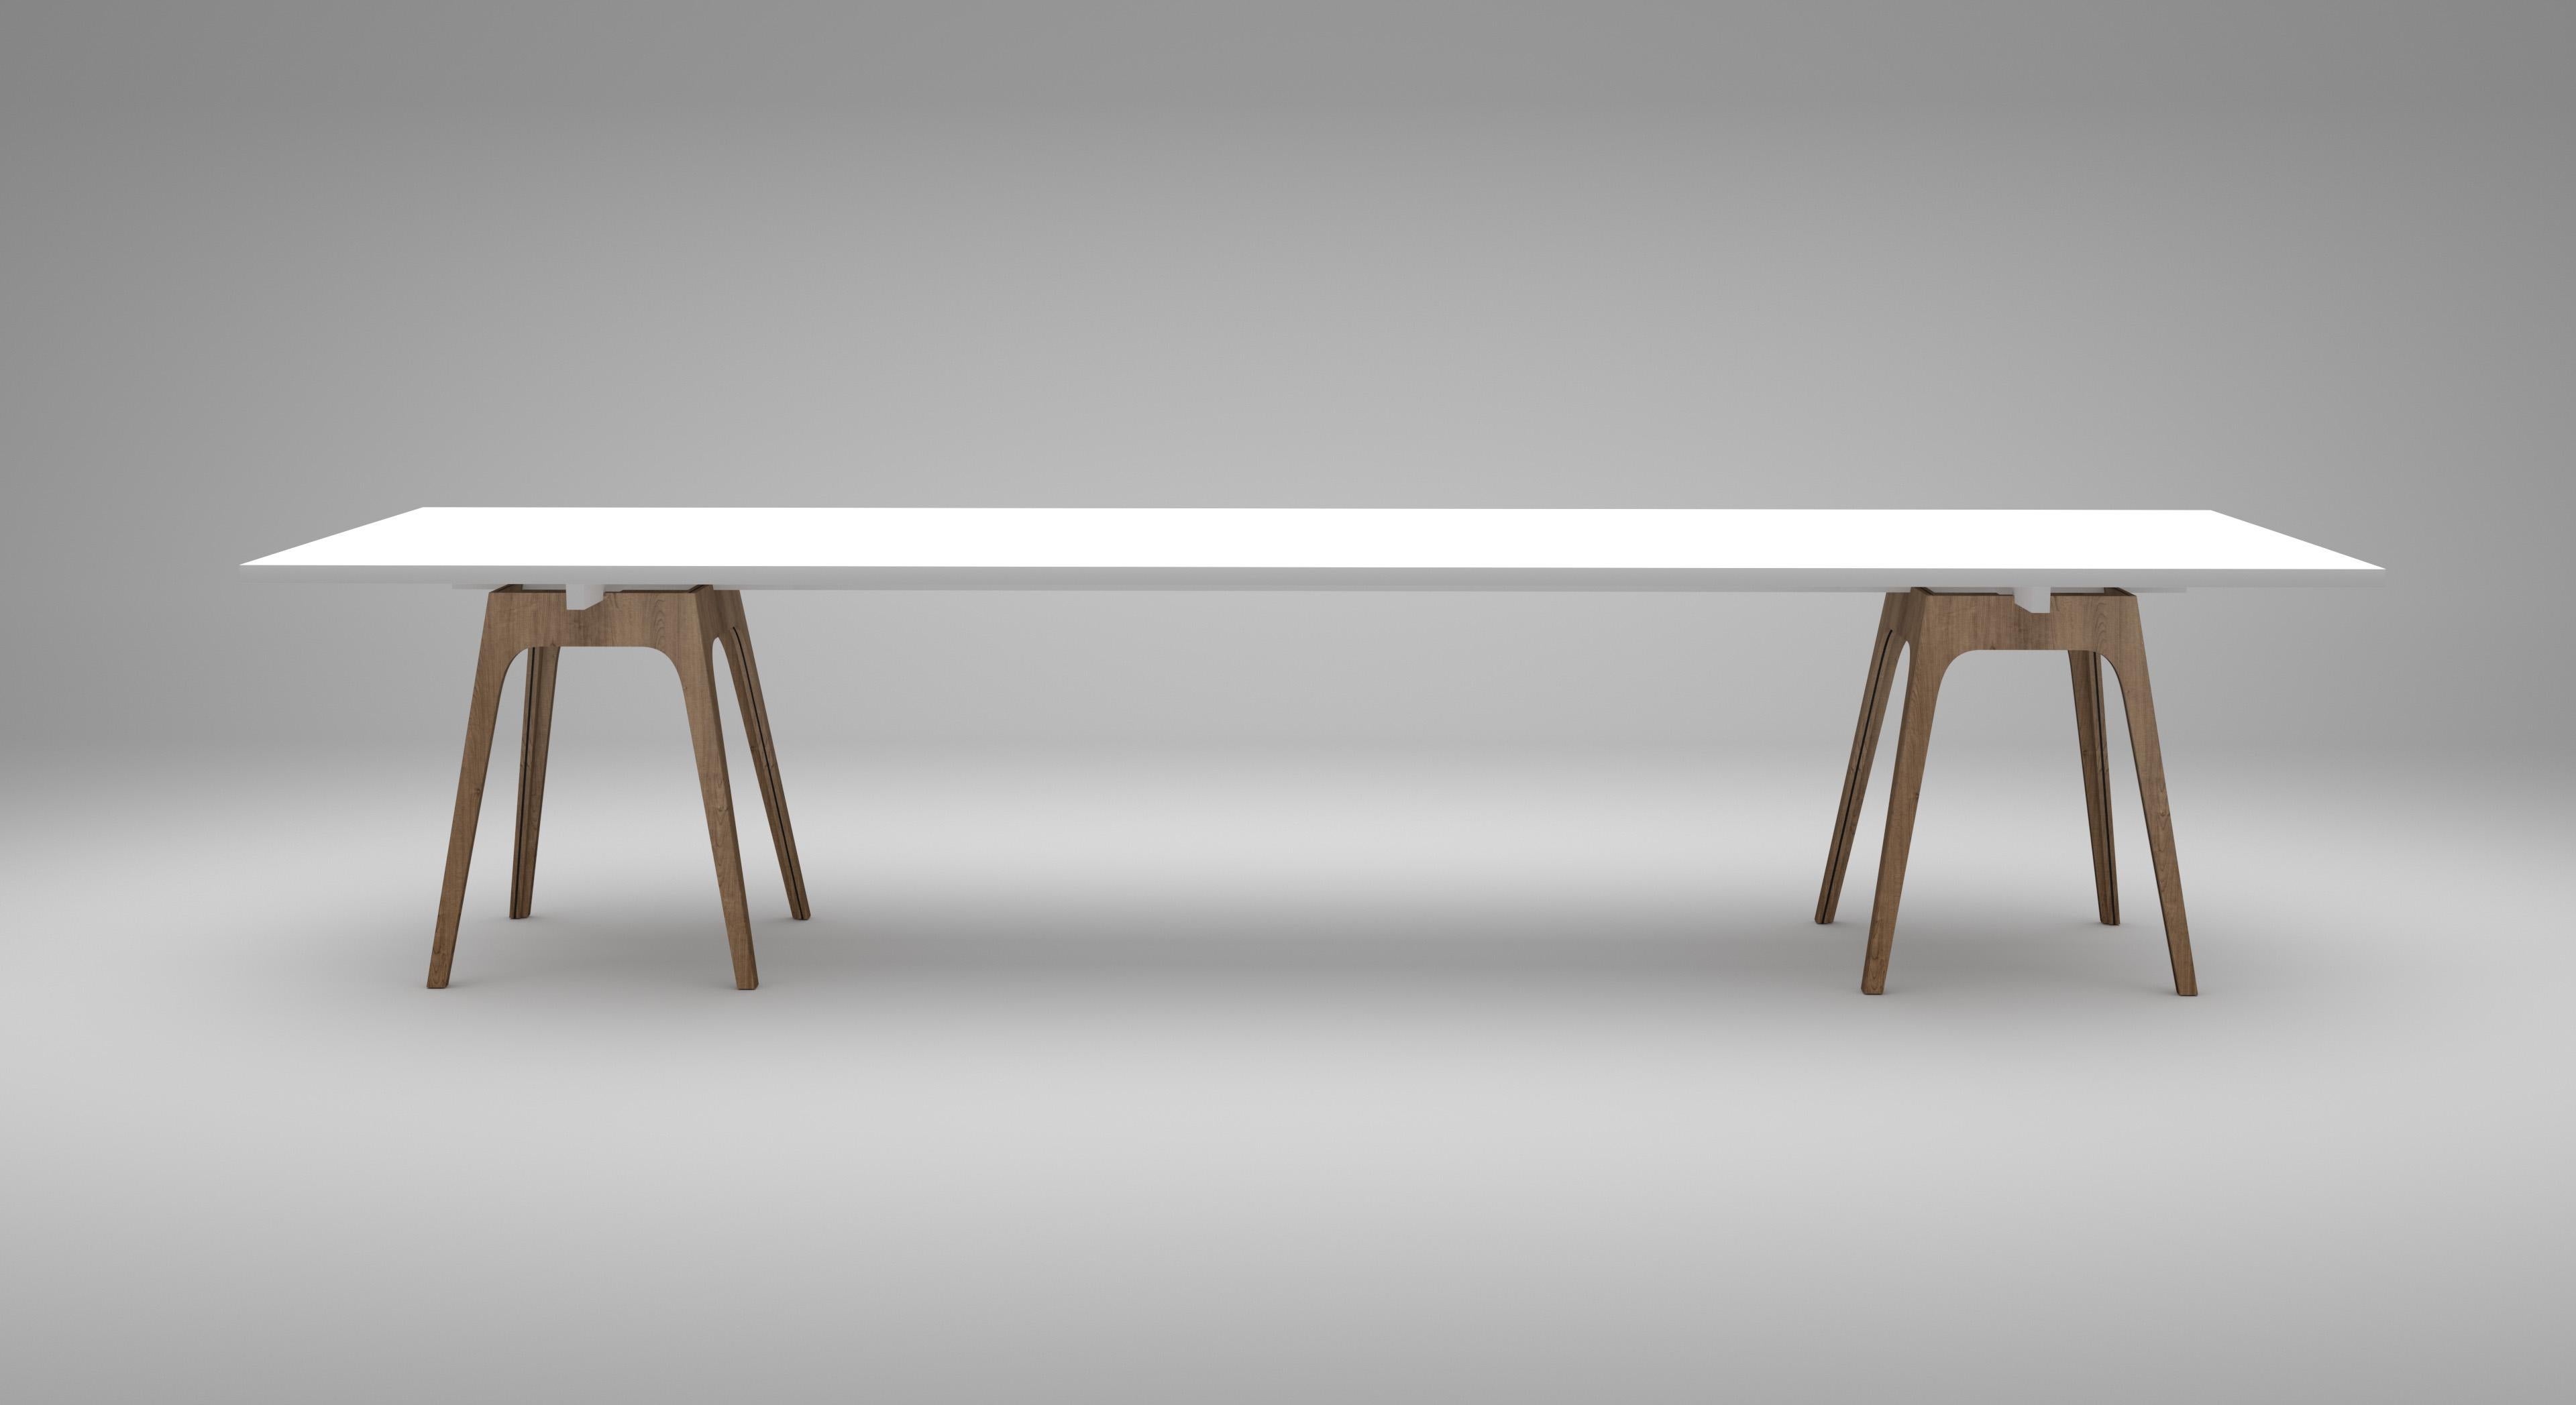 Marina White Dining Table by Cools Collection
Handmade.
Dimensions: D 100 x W 340 x H 75 cm.
Materials: Legs: Teak/Dibond. Tabletop: Spruce with corrosion resistant boat
paint.

Table top & bench top available in black or white. Please contact